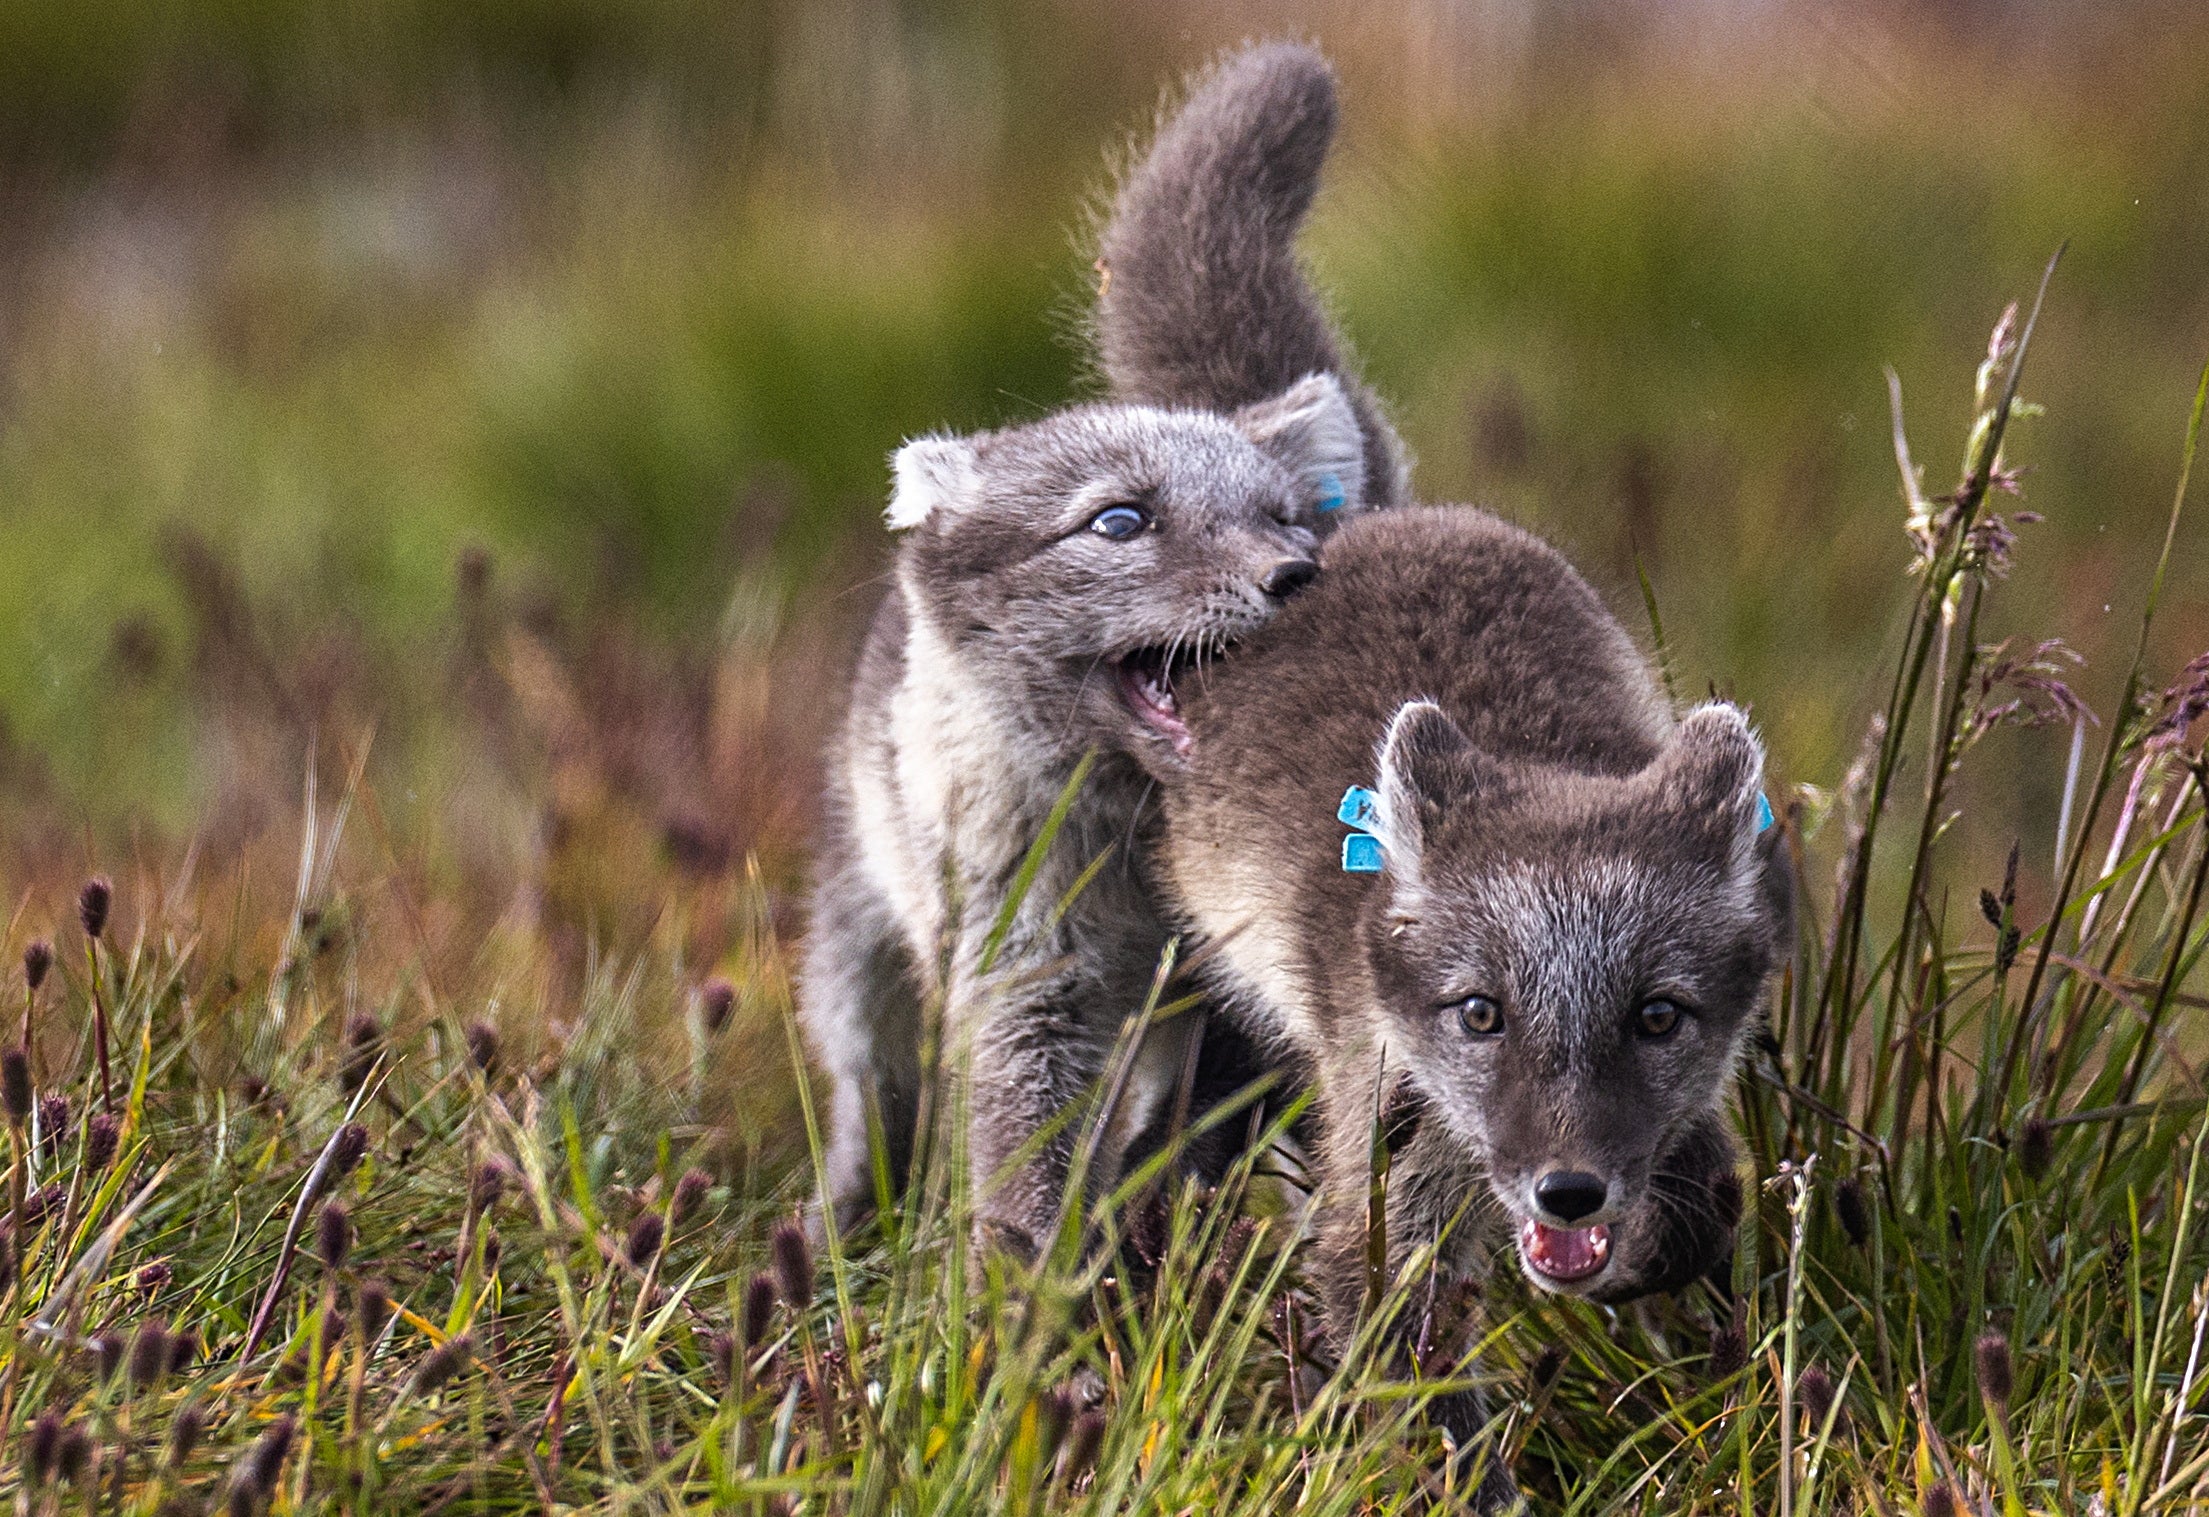 White Arctic fox pups play inside their enclosure at the Arctic Fox Captive Breeding Station near Oppdal, Norway